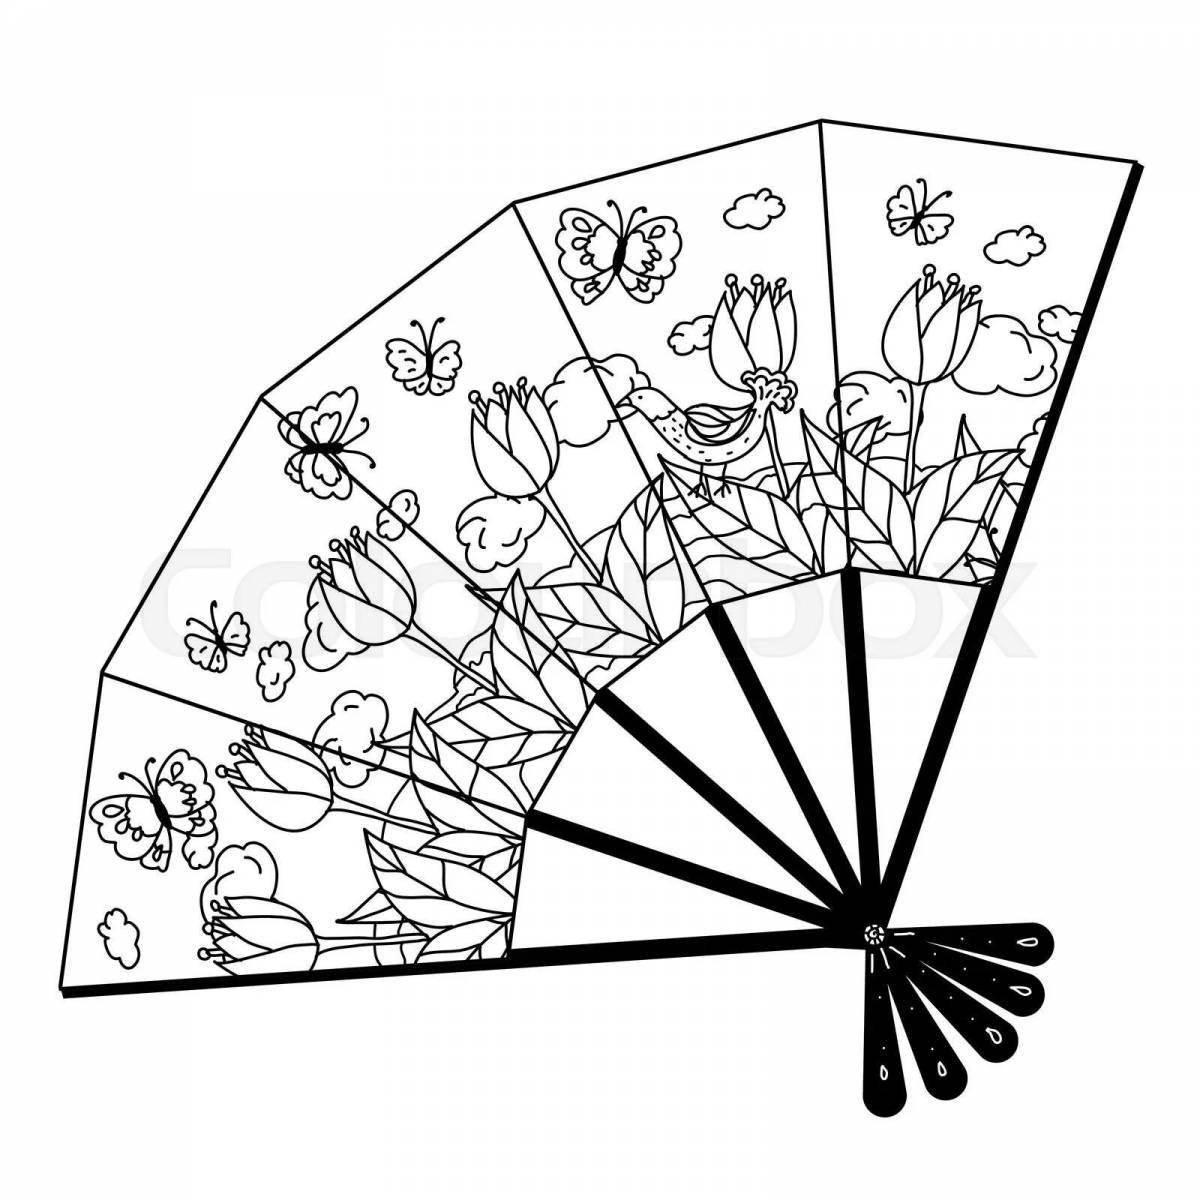 Coloring thin Chinese fan